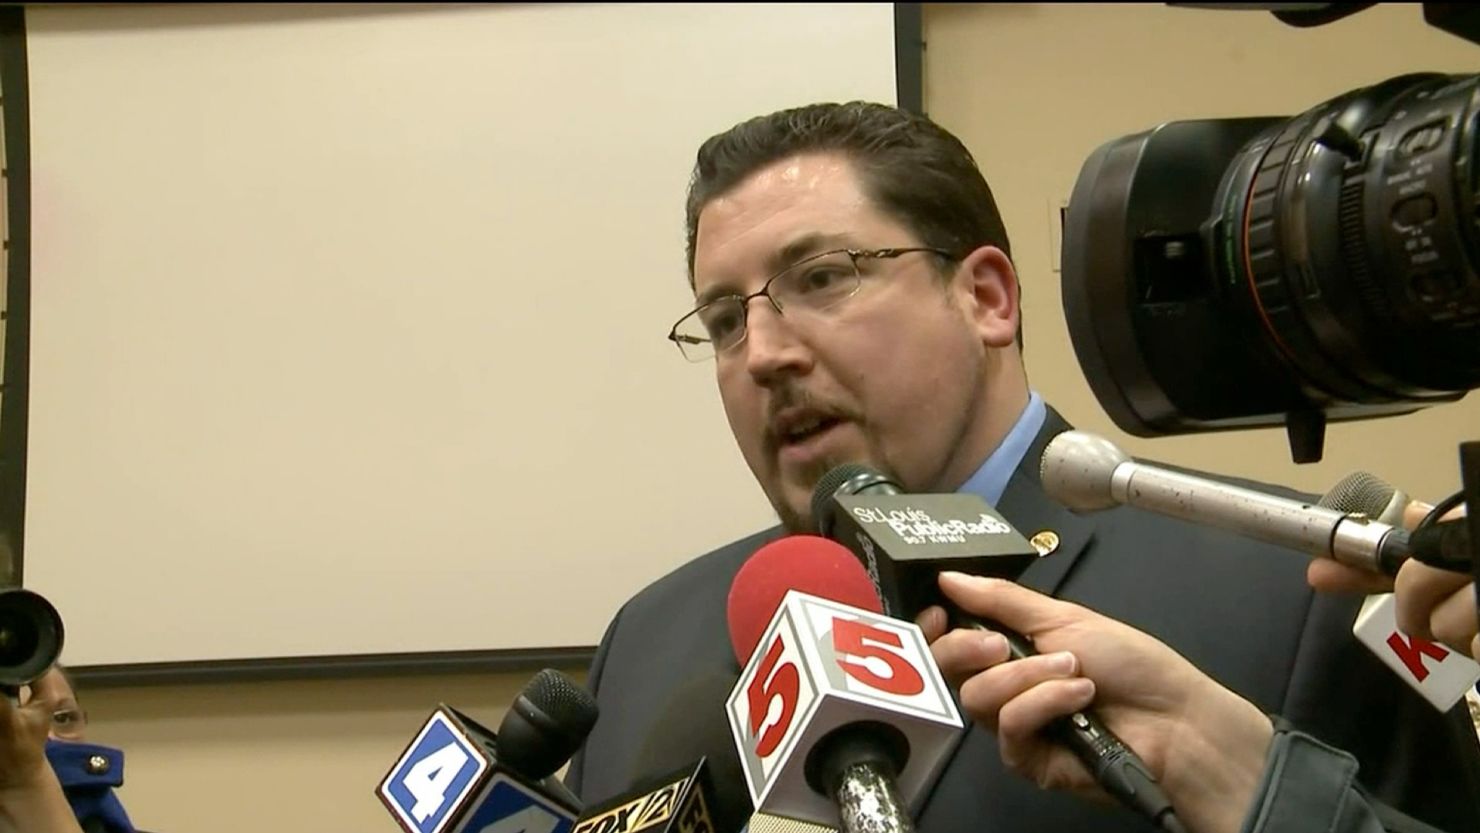 Mayor James Knowles won with 57% of the vote